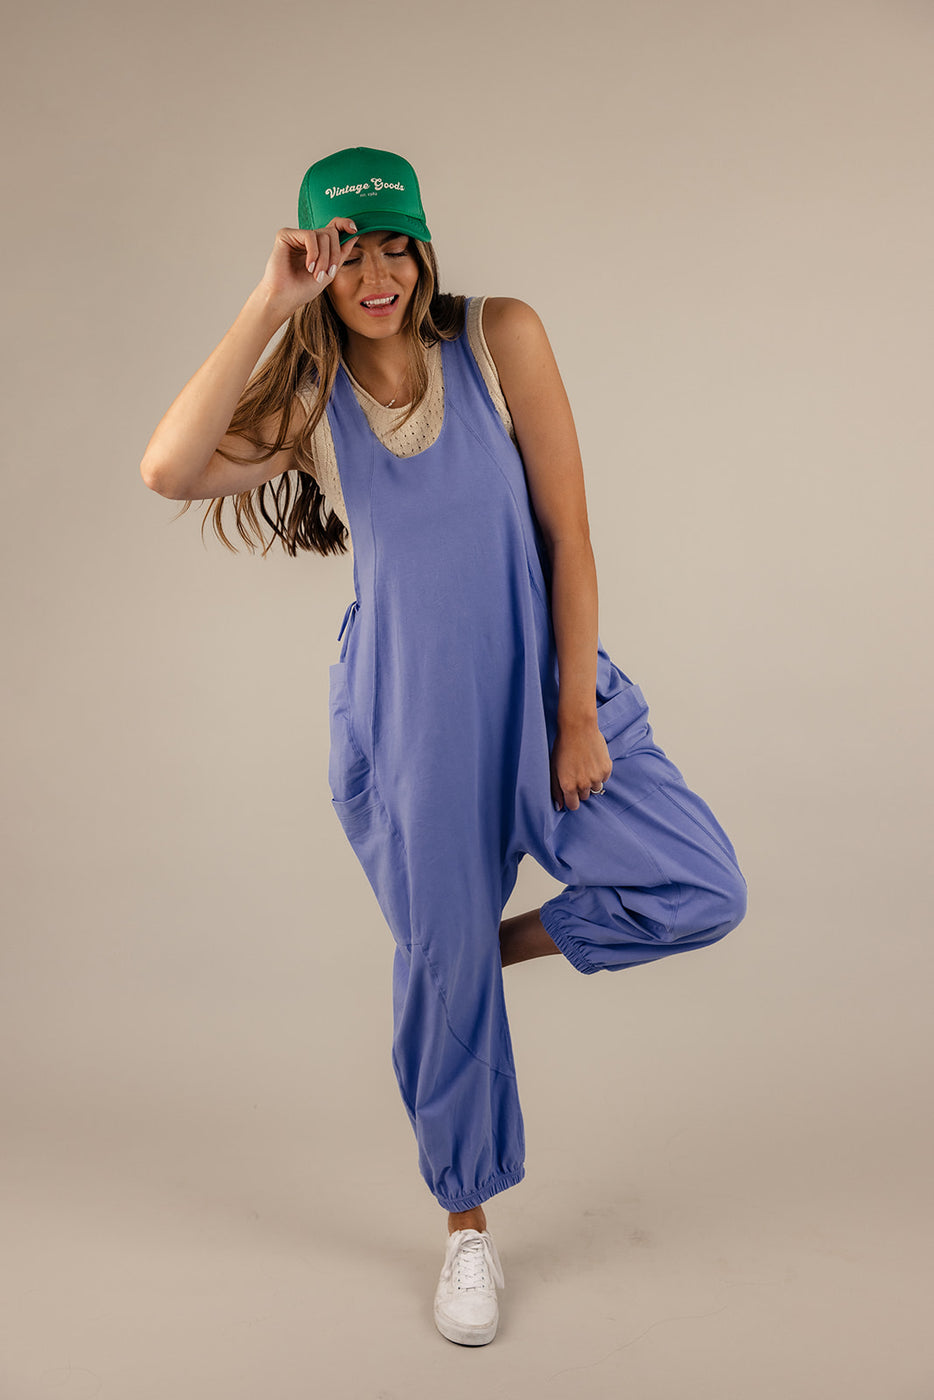 a woman wearing a hat and jumpsuit